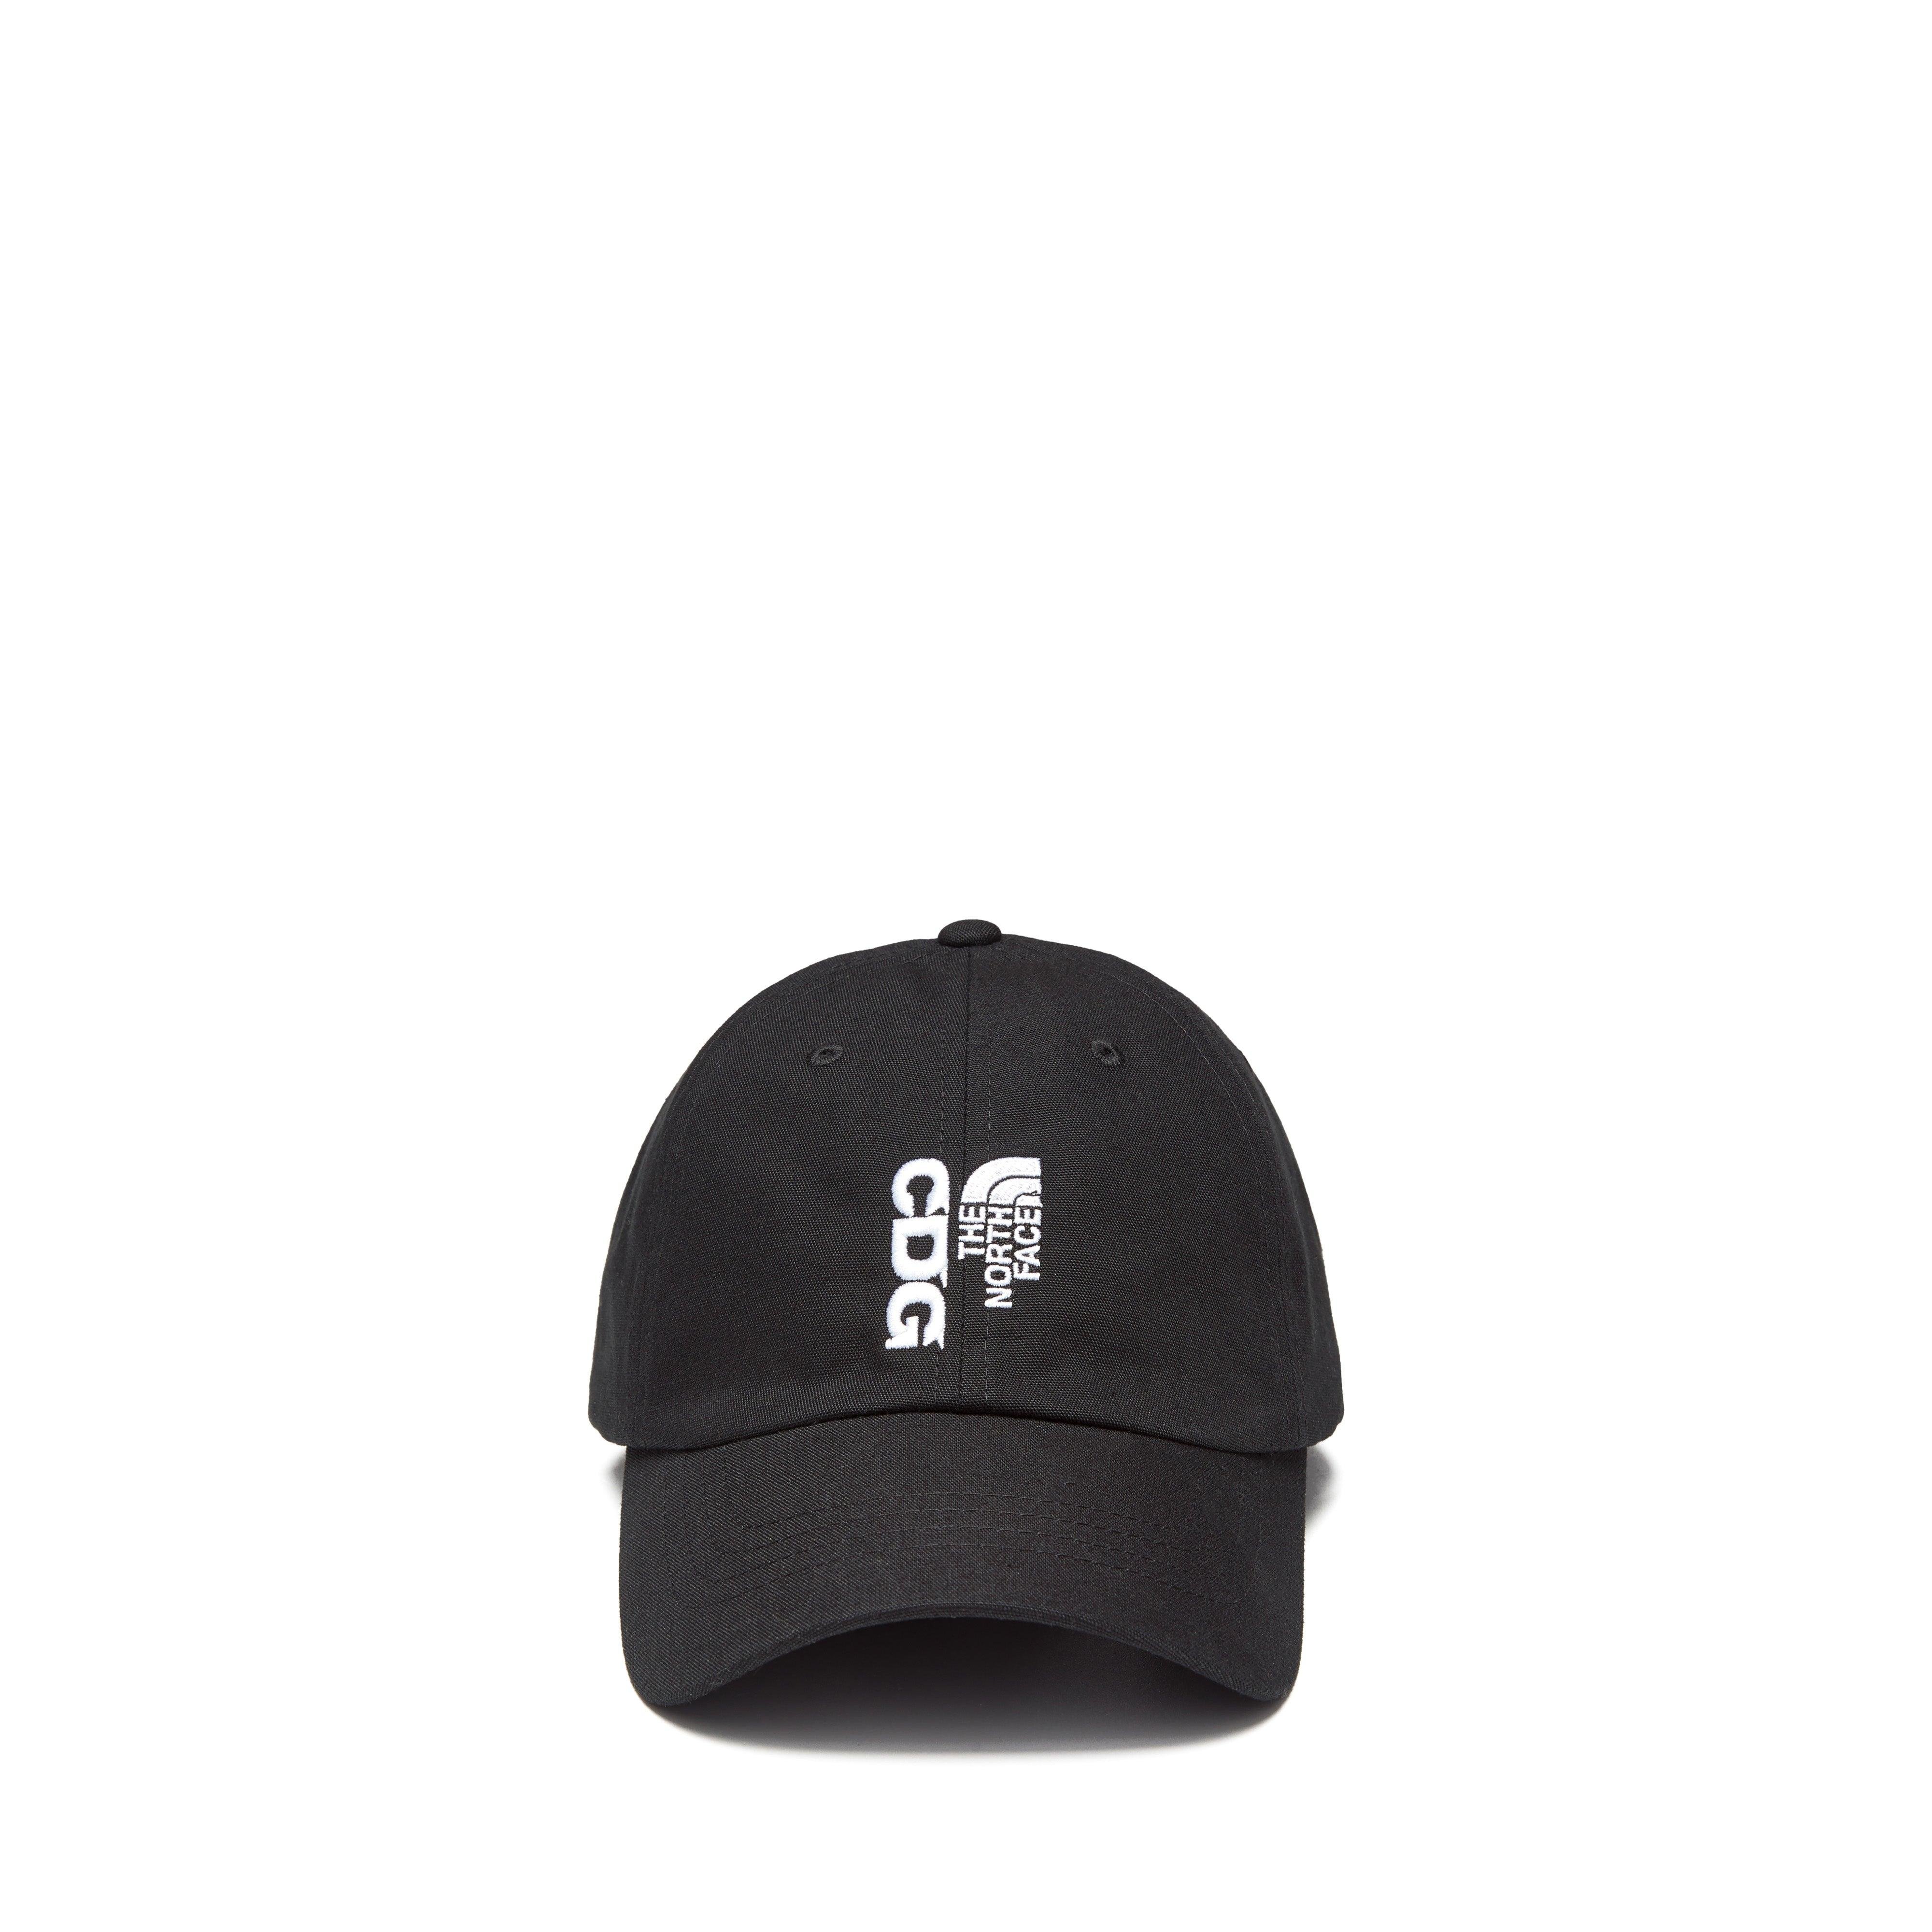 CDG - The North Face Norm Hat - (Black) by COMME DES GARCONS